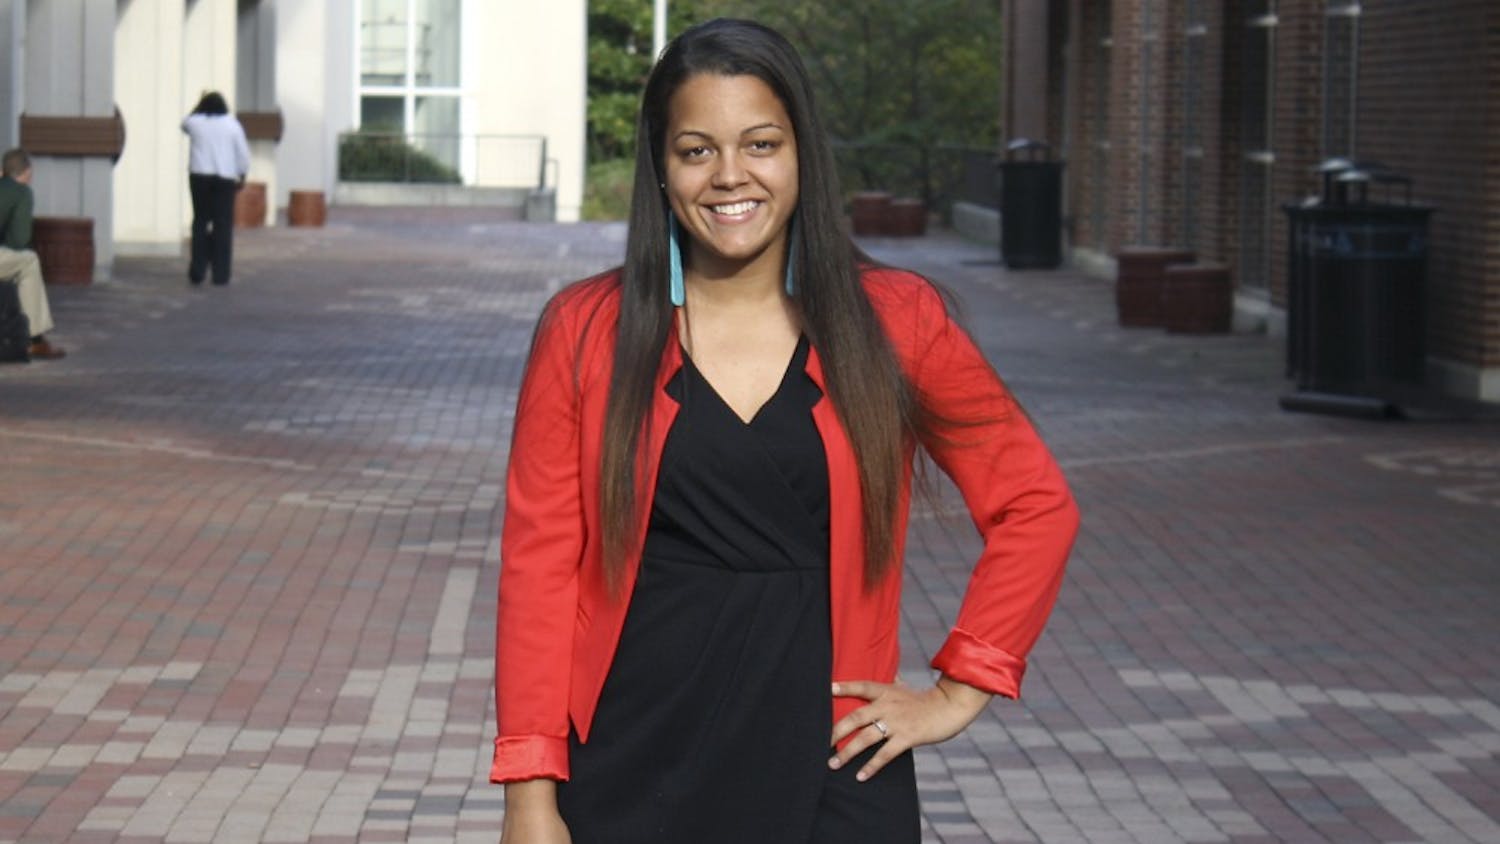 Senior Chelsea Barnes, a political science and communication studies major from Hope Mills, N.C., is the president of the Carolina Indian Circle, a student organization that serves to recognize Native American heritage. The bricks in-between the Union celebrate Native American heritage.